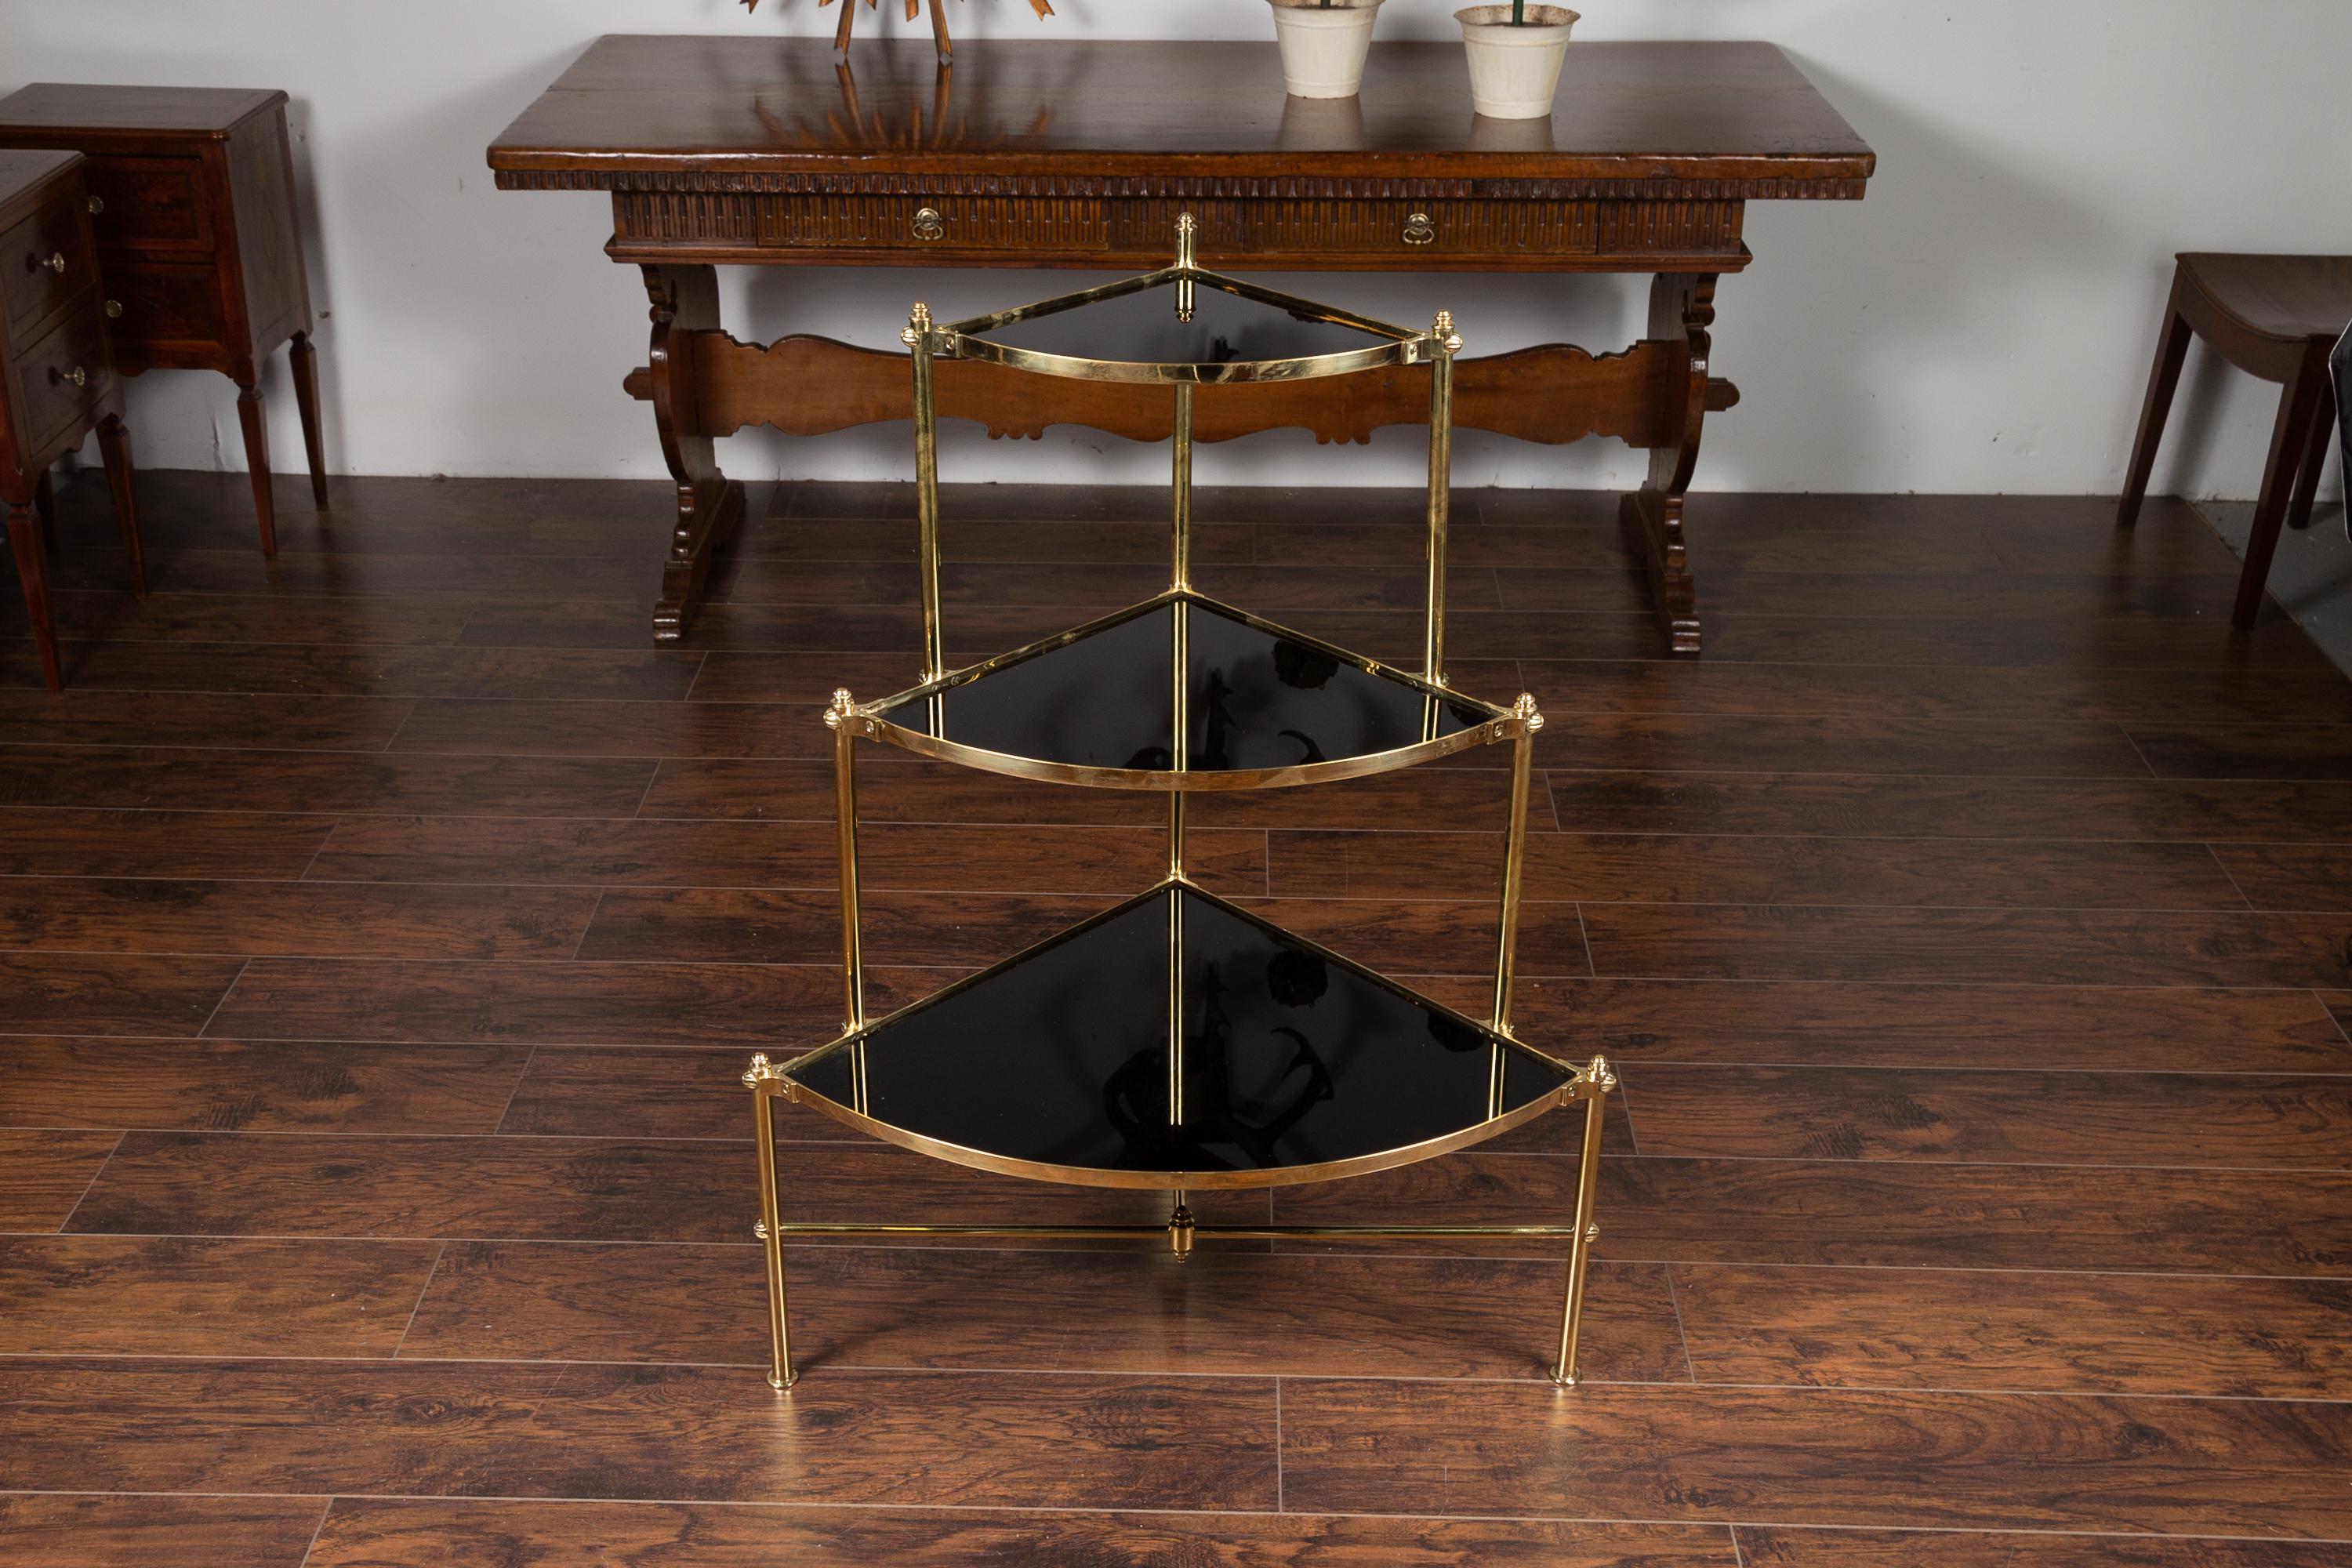 A vintage Italian tiered brass corner étagère from the mid-20th century, with black glass shelves. Born in Italy during the midcentury period, this stylish corner étagère features an elegant brass structure strengthened with stretchers, securing